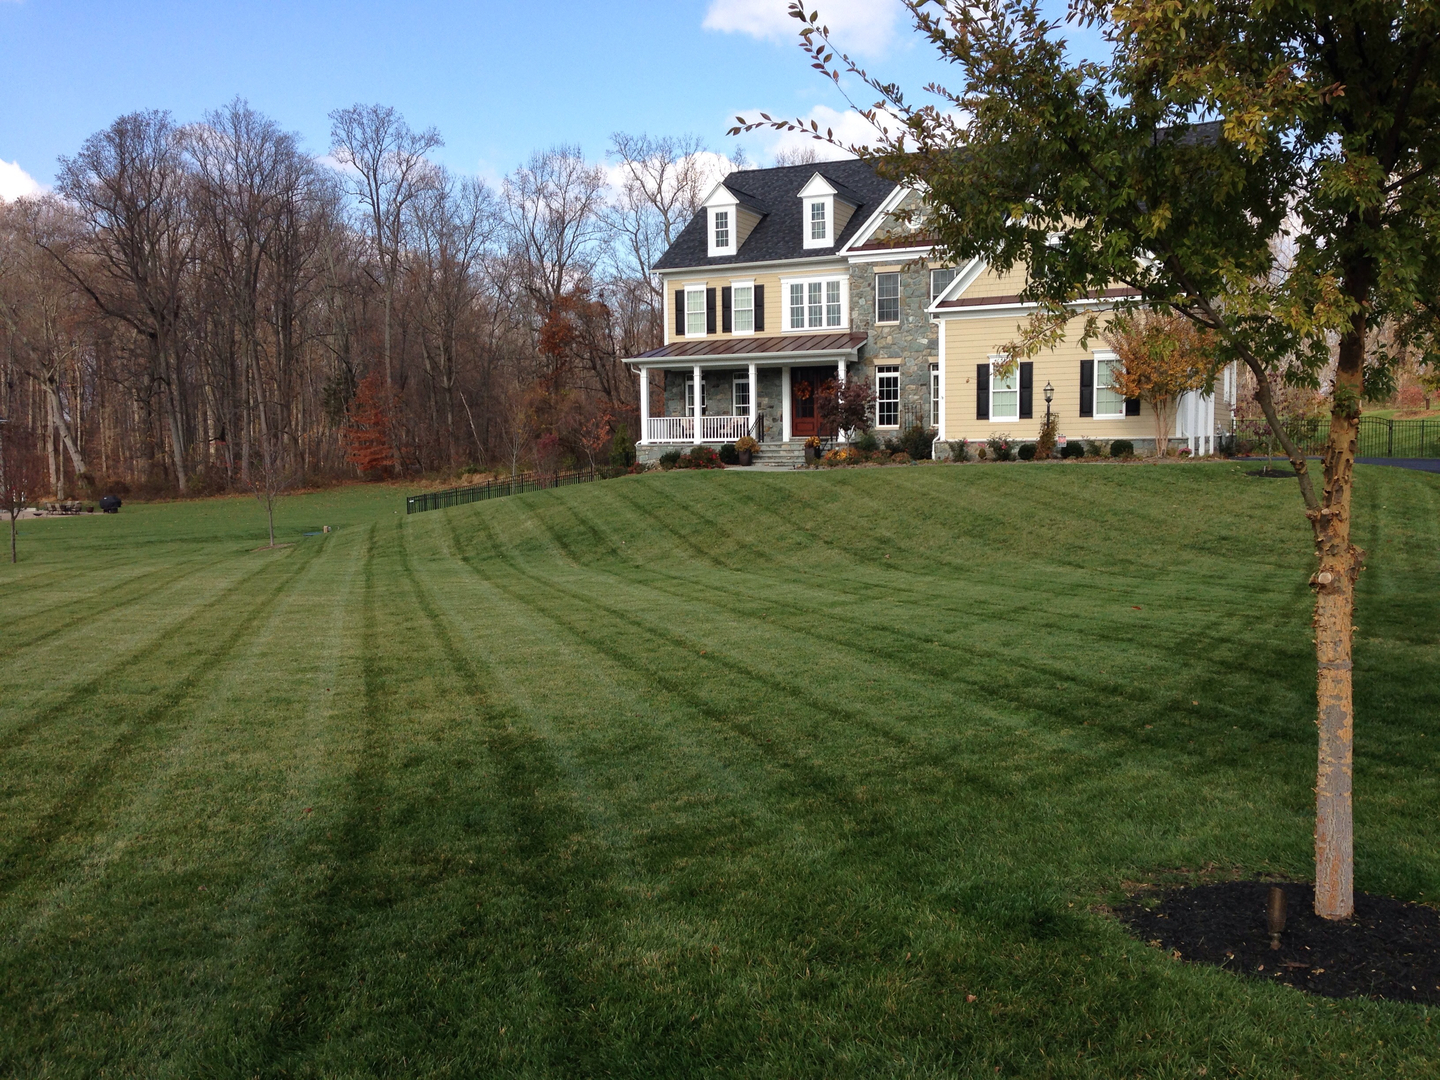 Learn how to keep your grass healthy and green year-round.